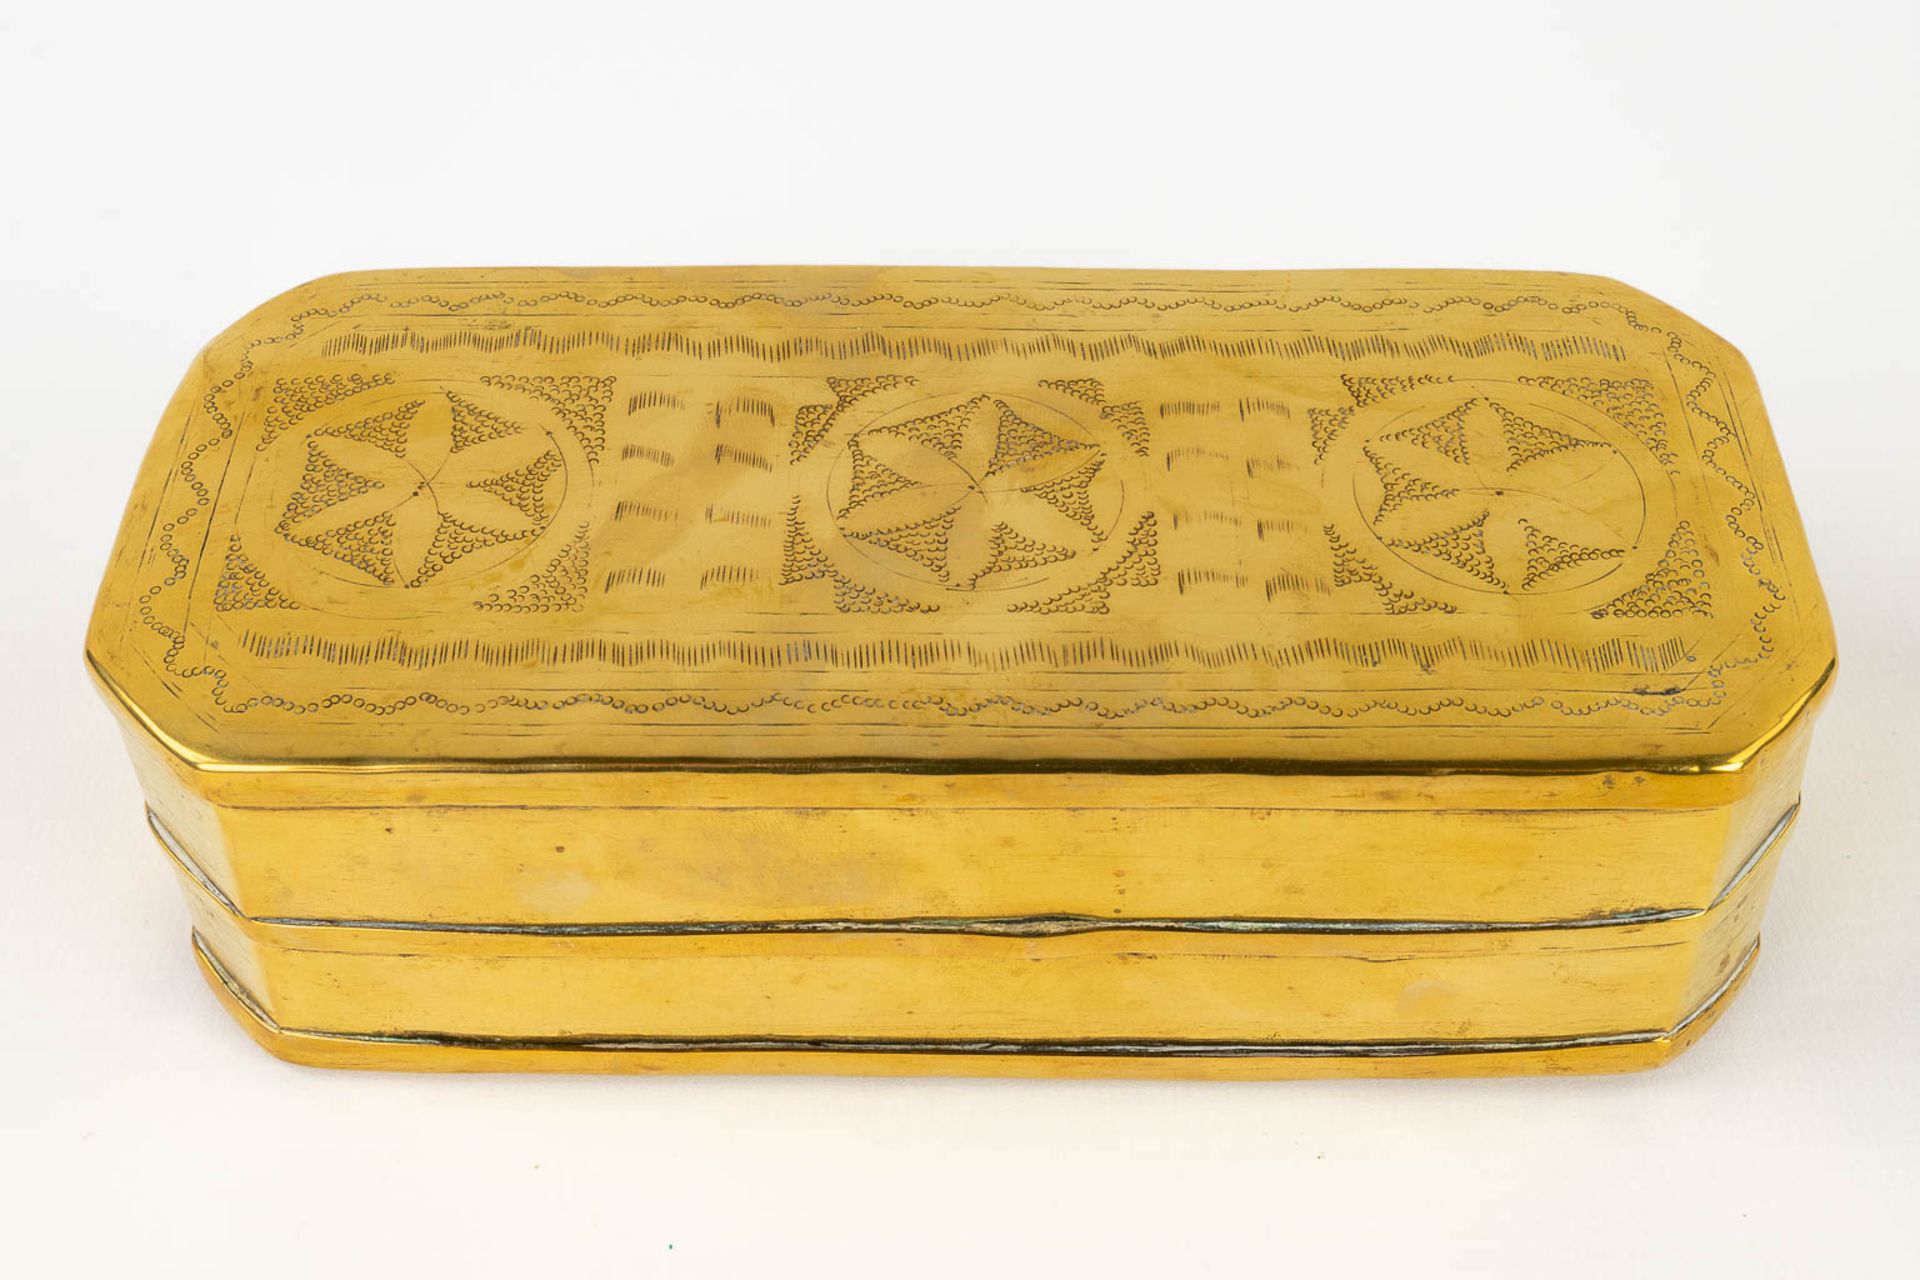 A collection of 3 antique oval tobacco boxes, made of copper. 18th/19th C. (L: 7 x W: 12 x H: 3,5 cm - Image 3 of 13